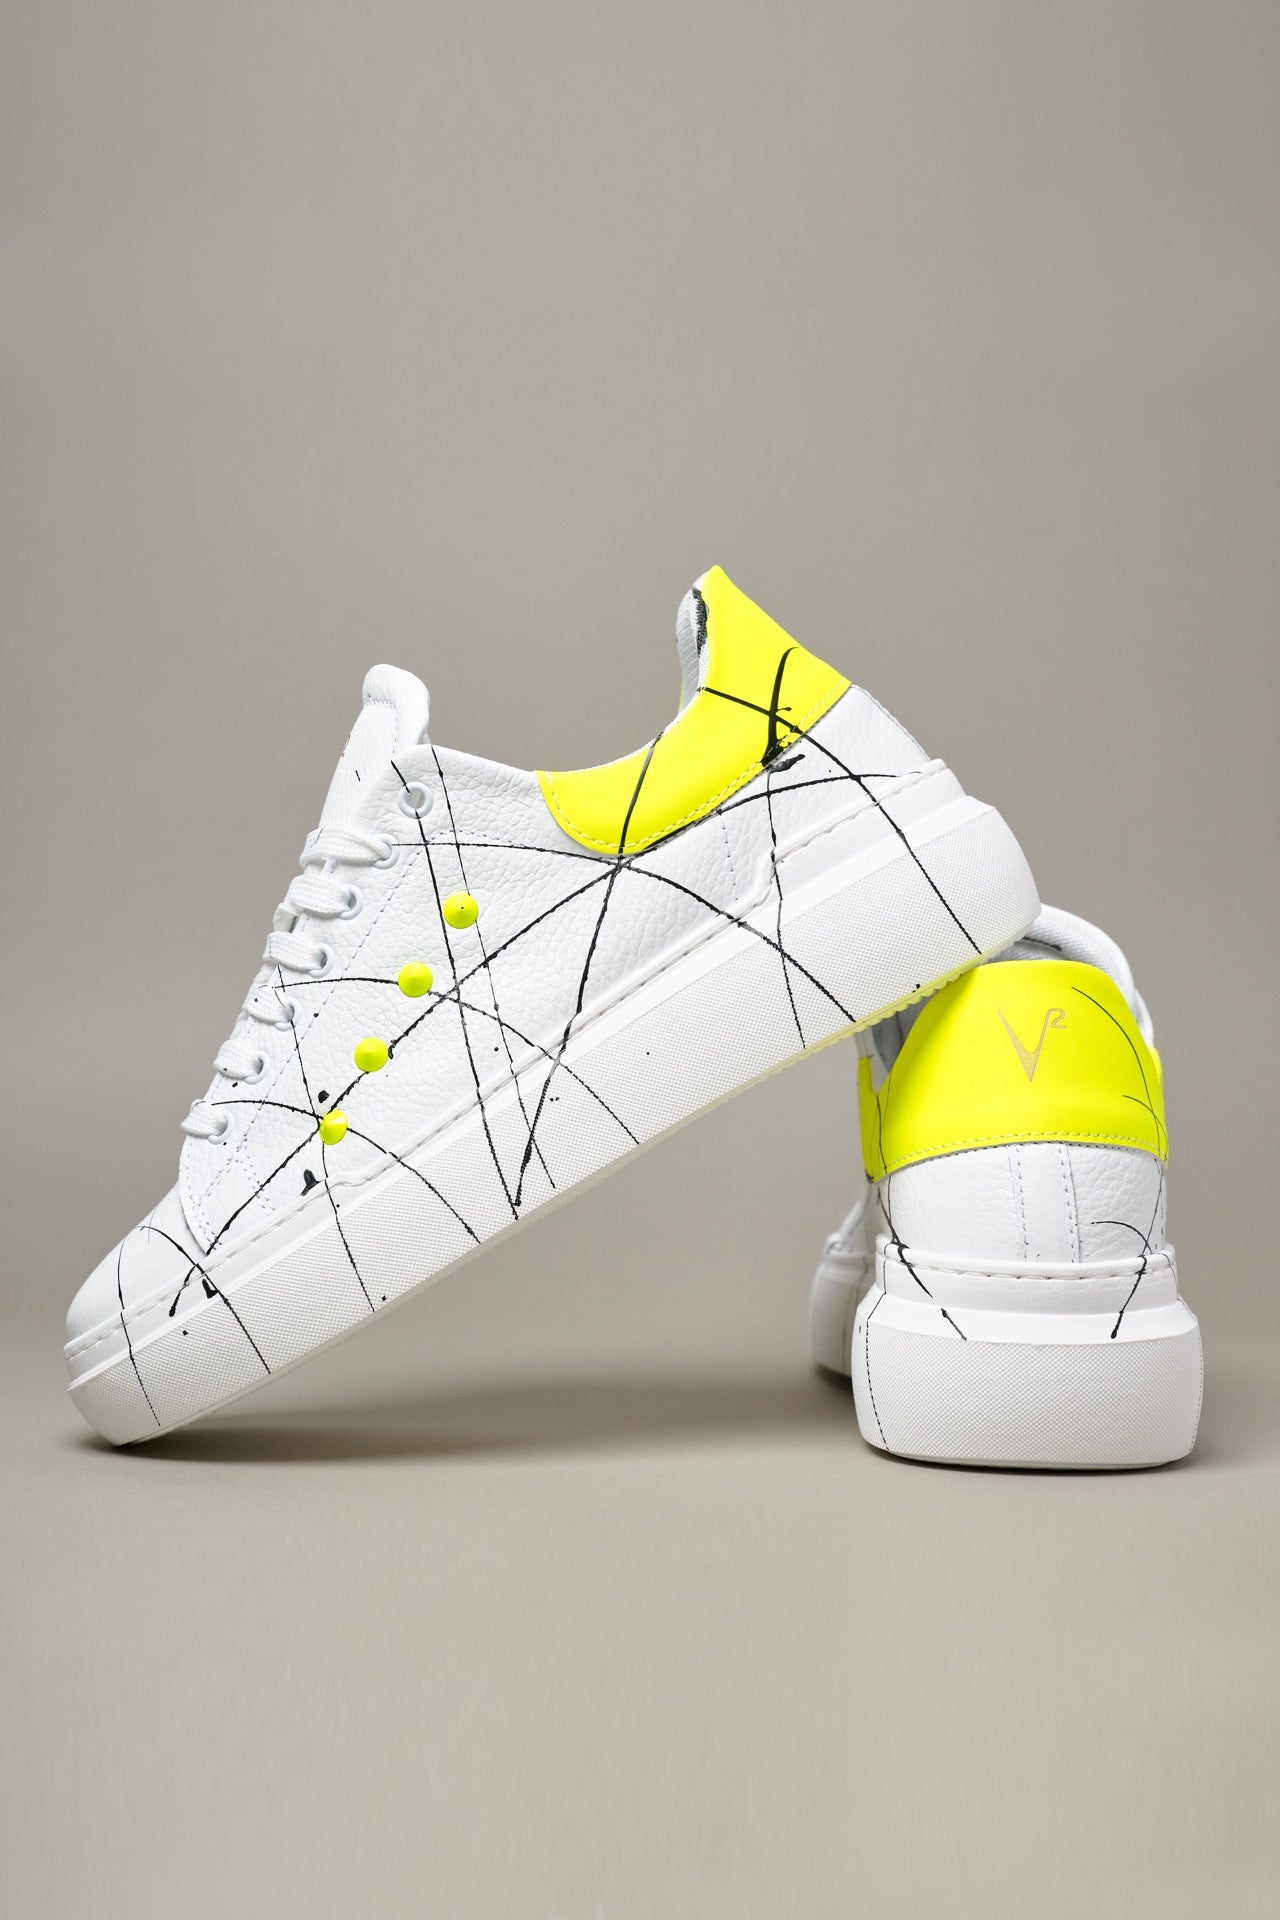 HAMMER - High sole sneakers in hammered leather with back and studs in Fluo Yellow and splashes of paint